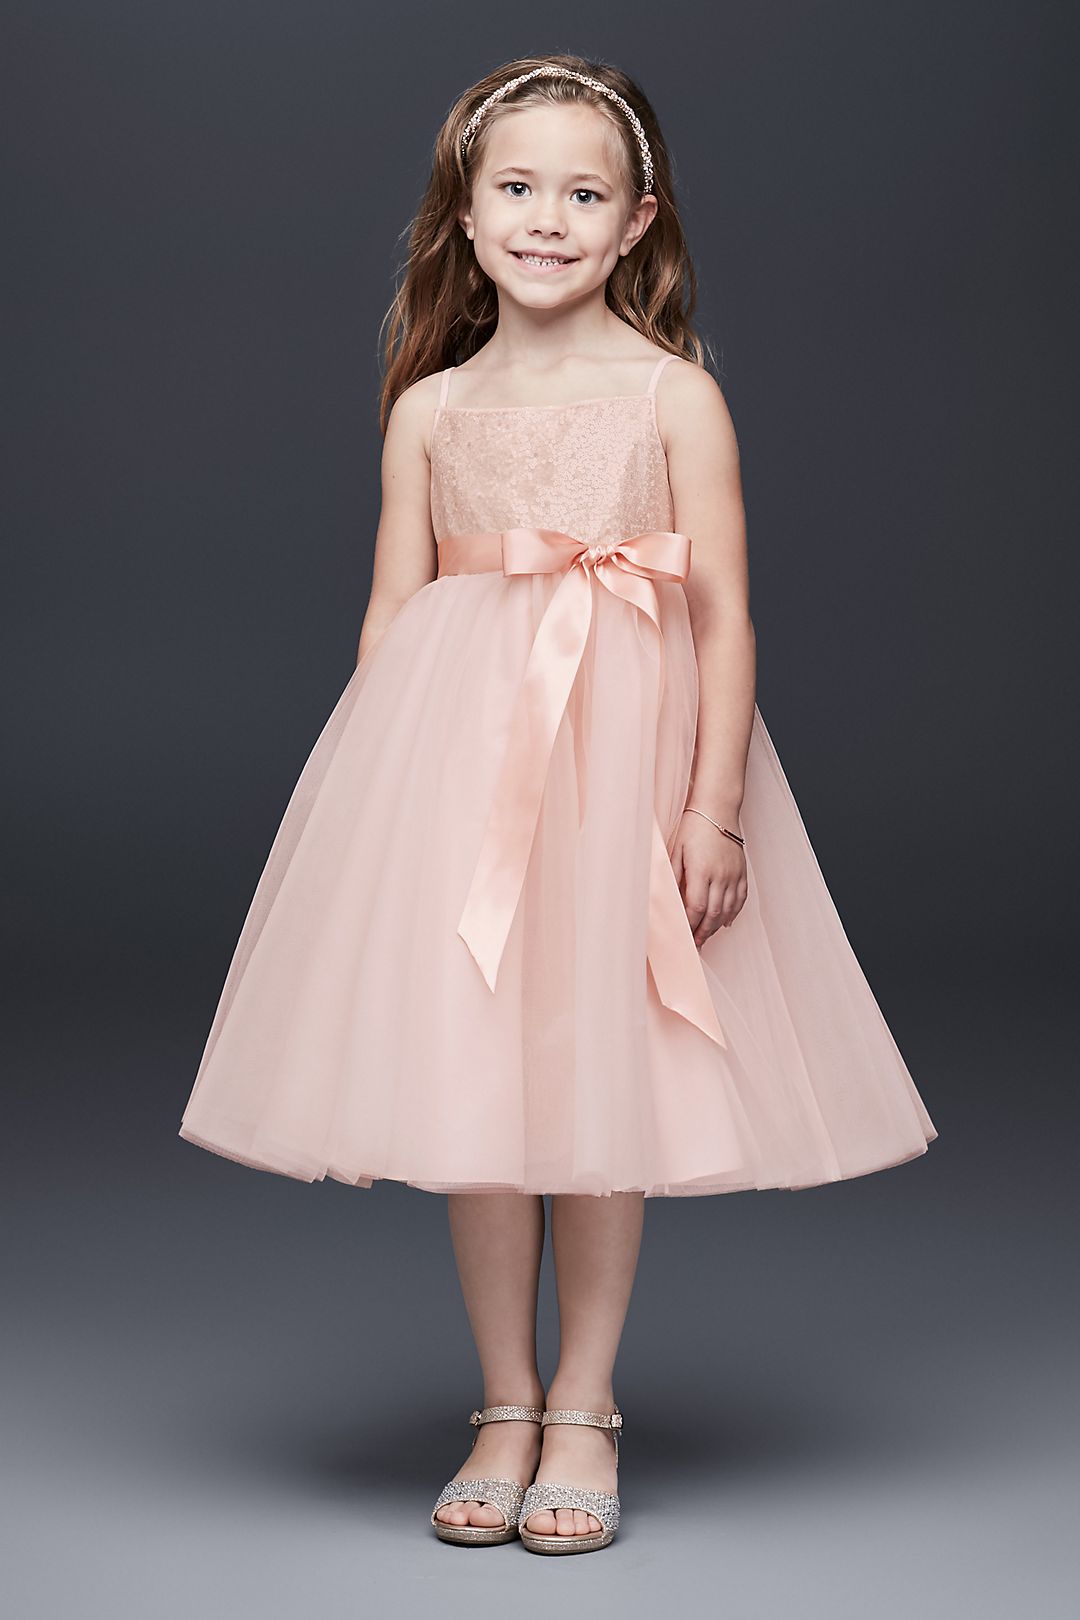 Sequin and Tulle Flower Girl Dress with Satin Sash Image 1